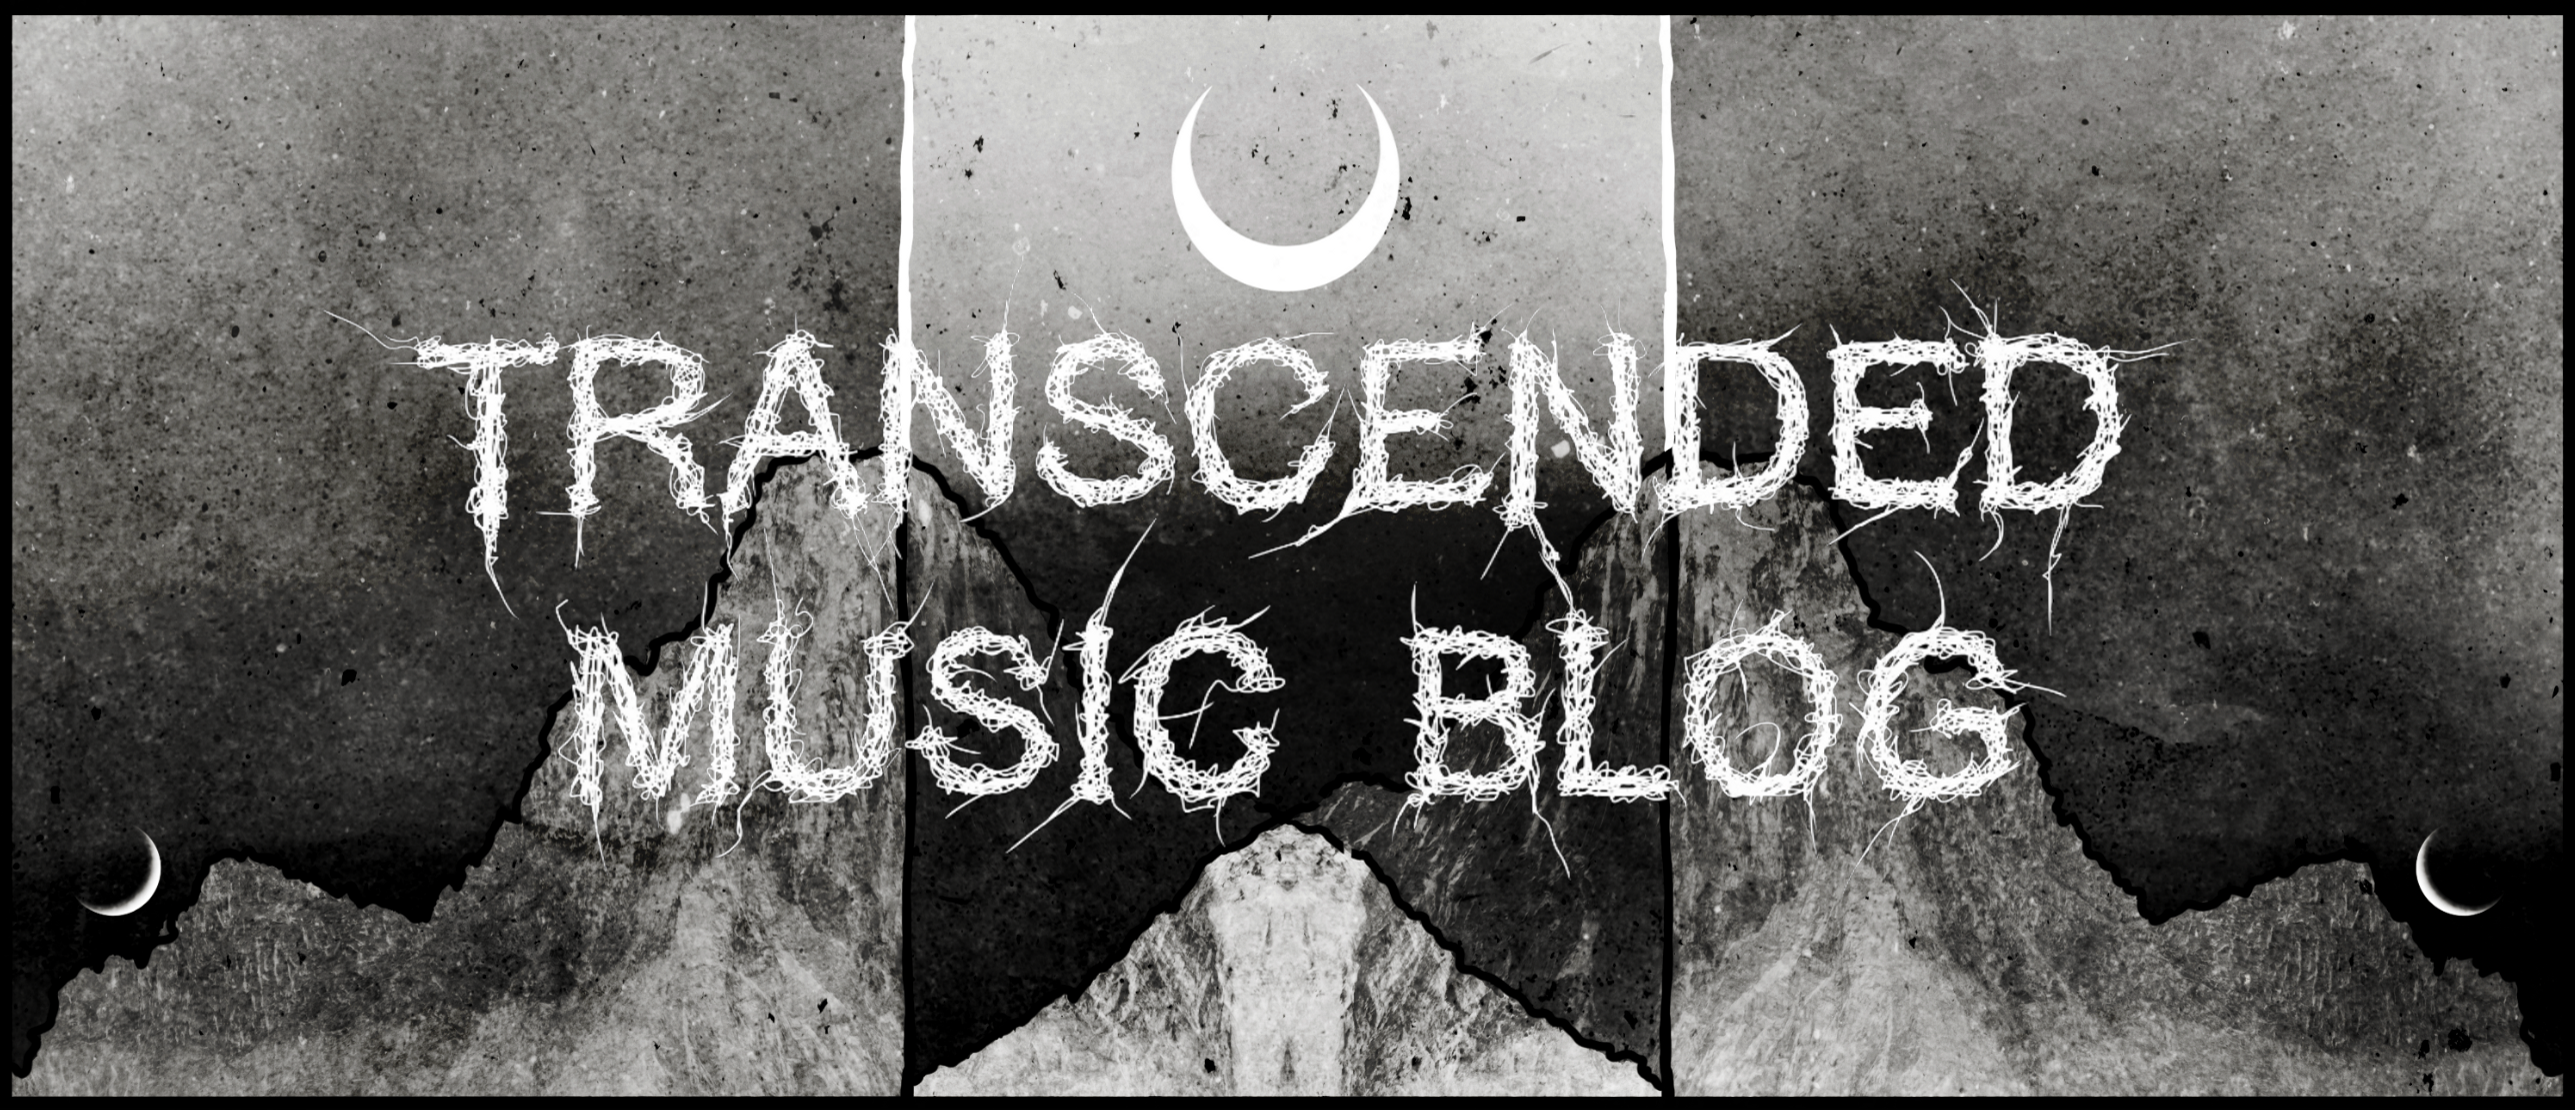 
				<header class="entry-header">
					<h2 class="entry-title">
						<a title="Trancended Music Blog" href="https://www.transcendedmusic.de/2020/07/dun-ringill-library-of-death-review/" target="_blank">Trancended Music Blog</a>
					</h2><p class="entry-meta"><span class="position">8/10</span></p></header>